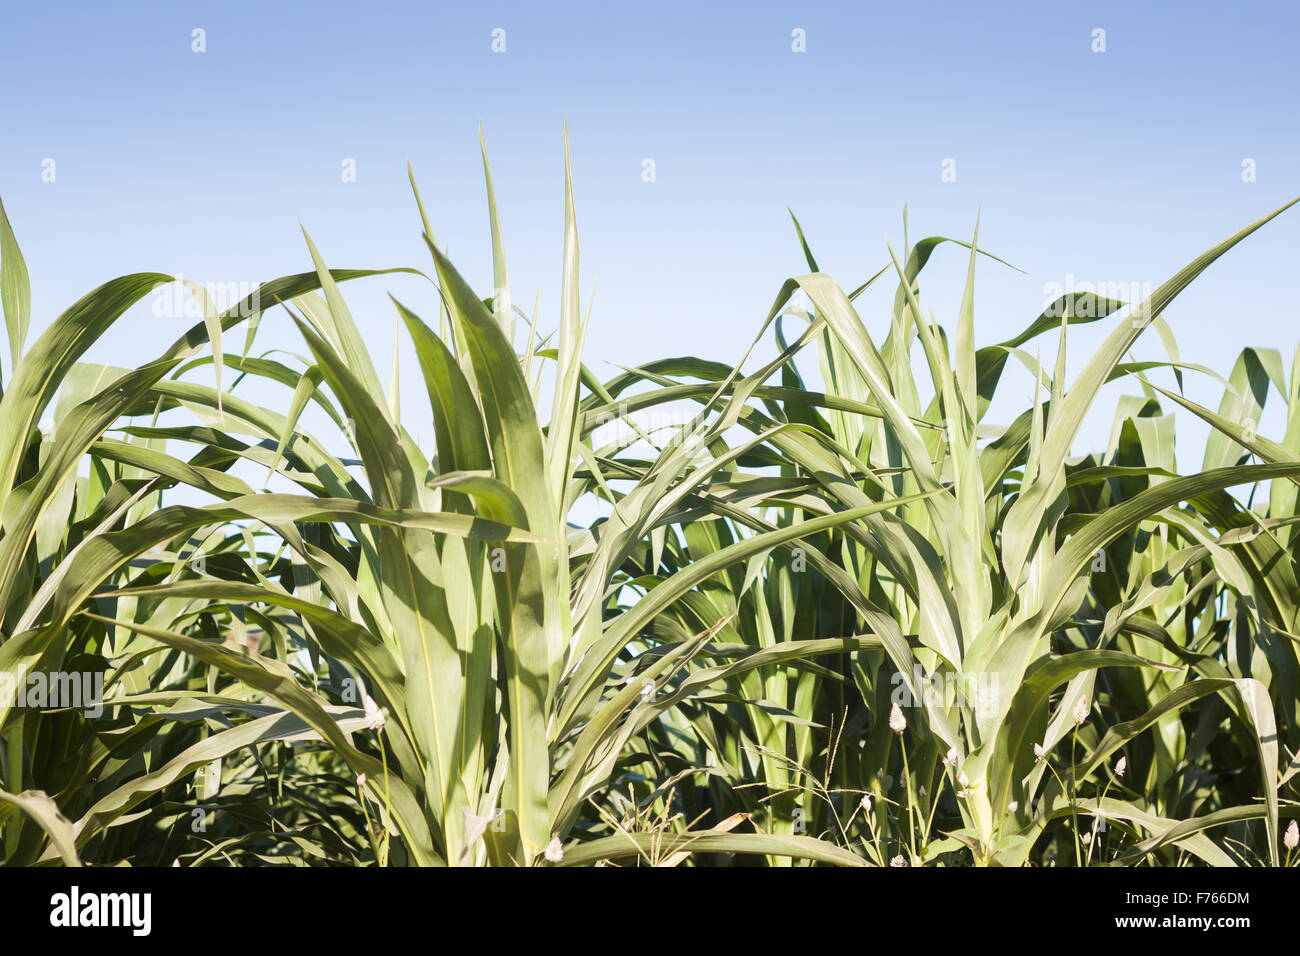 Green field of corn growing up, stock photo Stock Photo